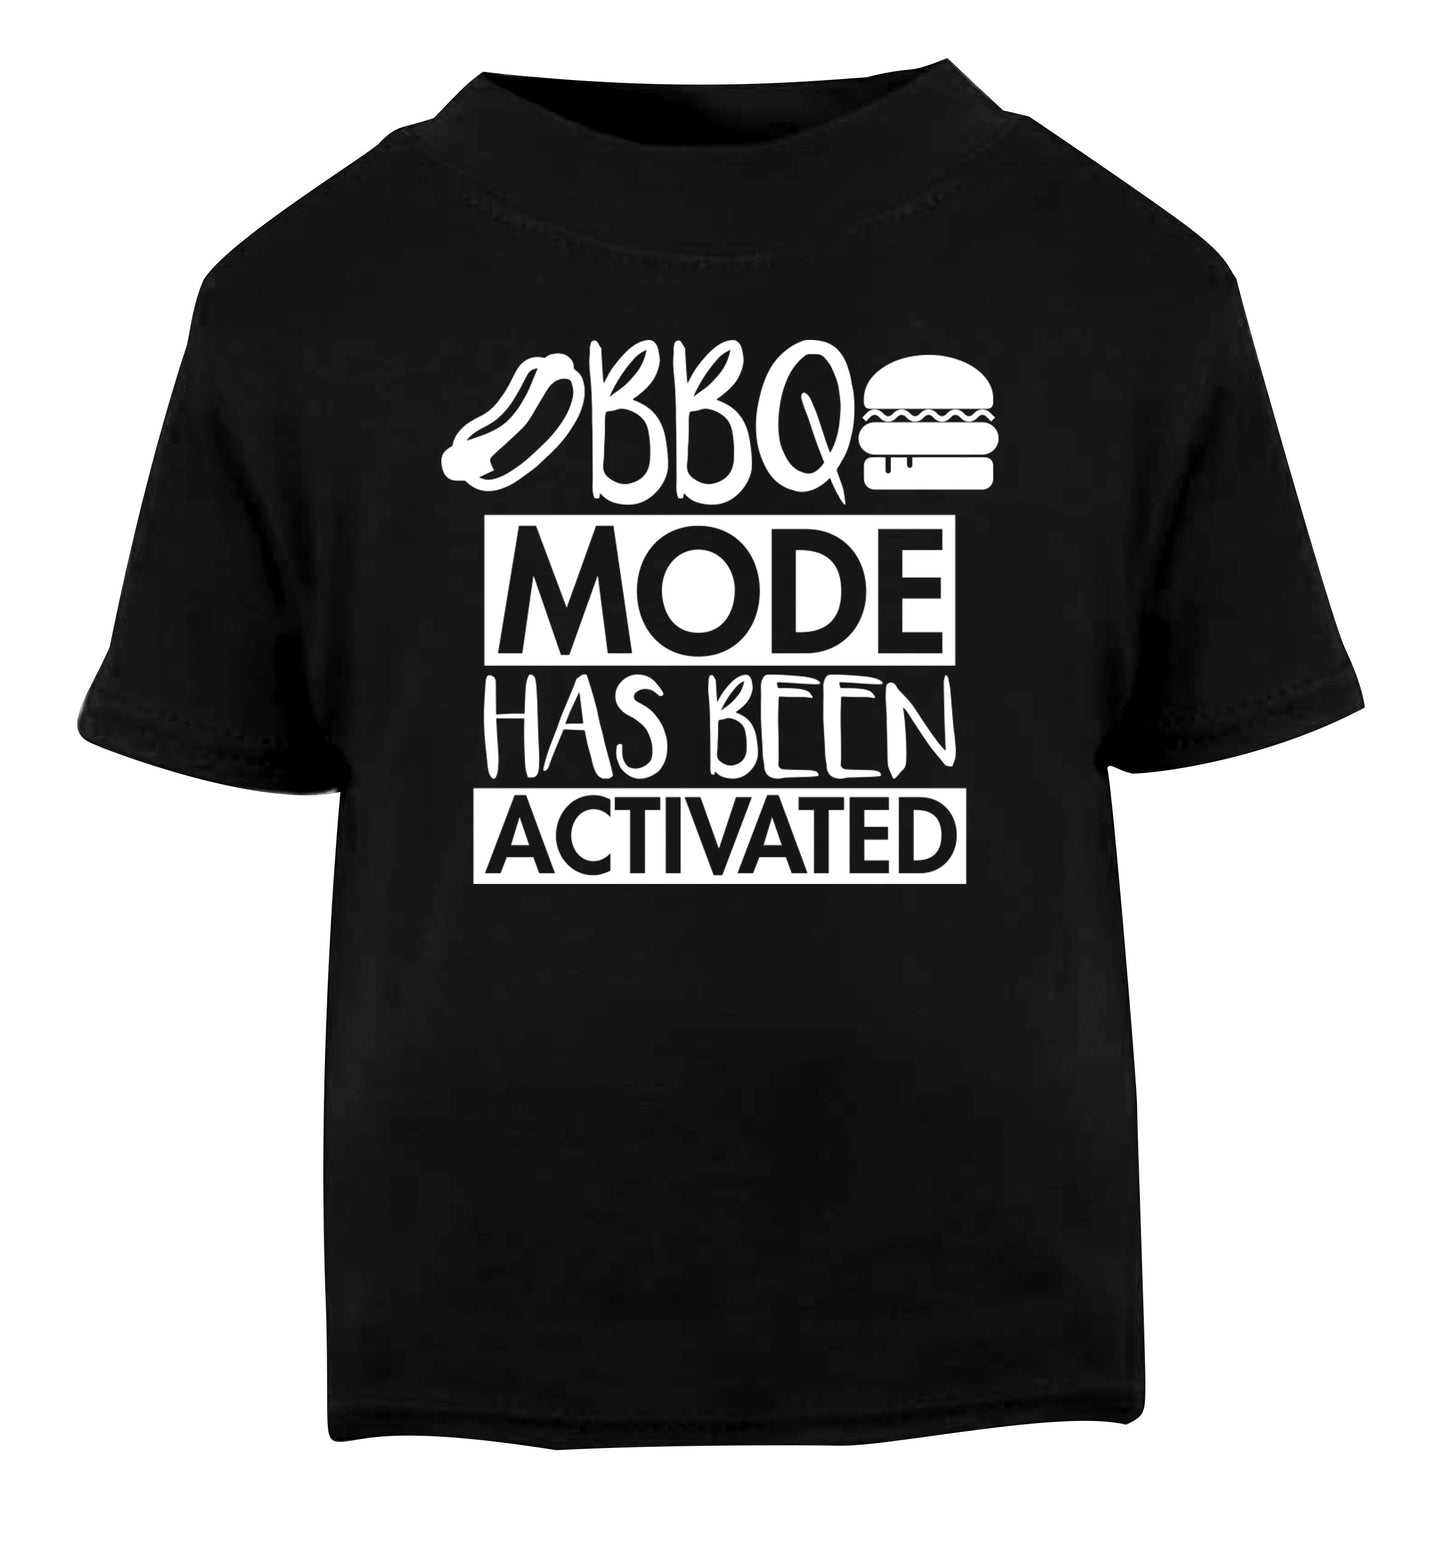 Bbq mode has been activated Black Baby Toddler Tshirt 2 years